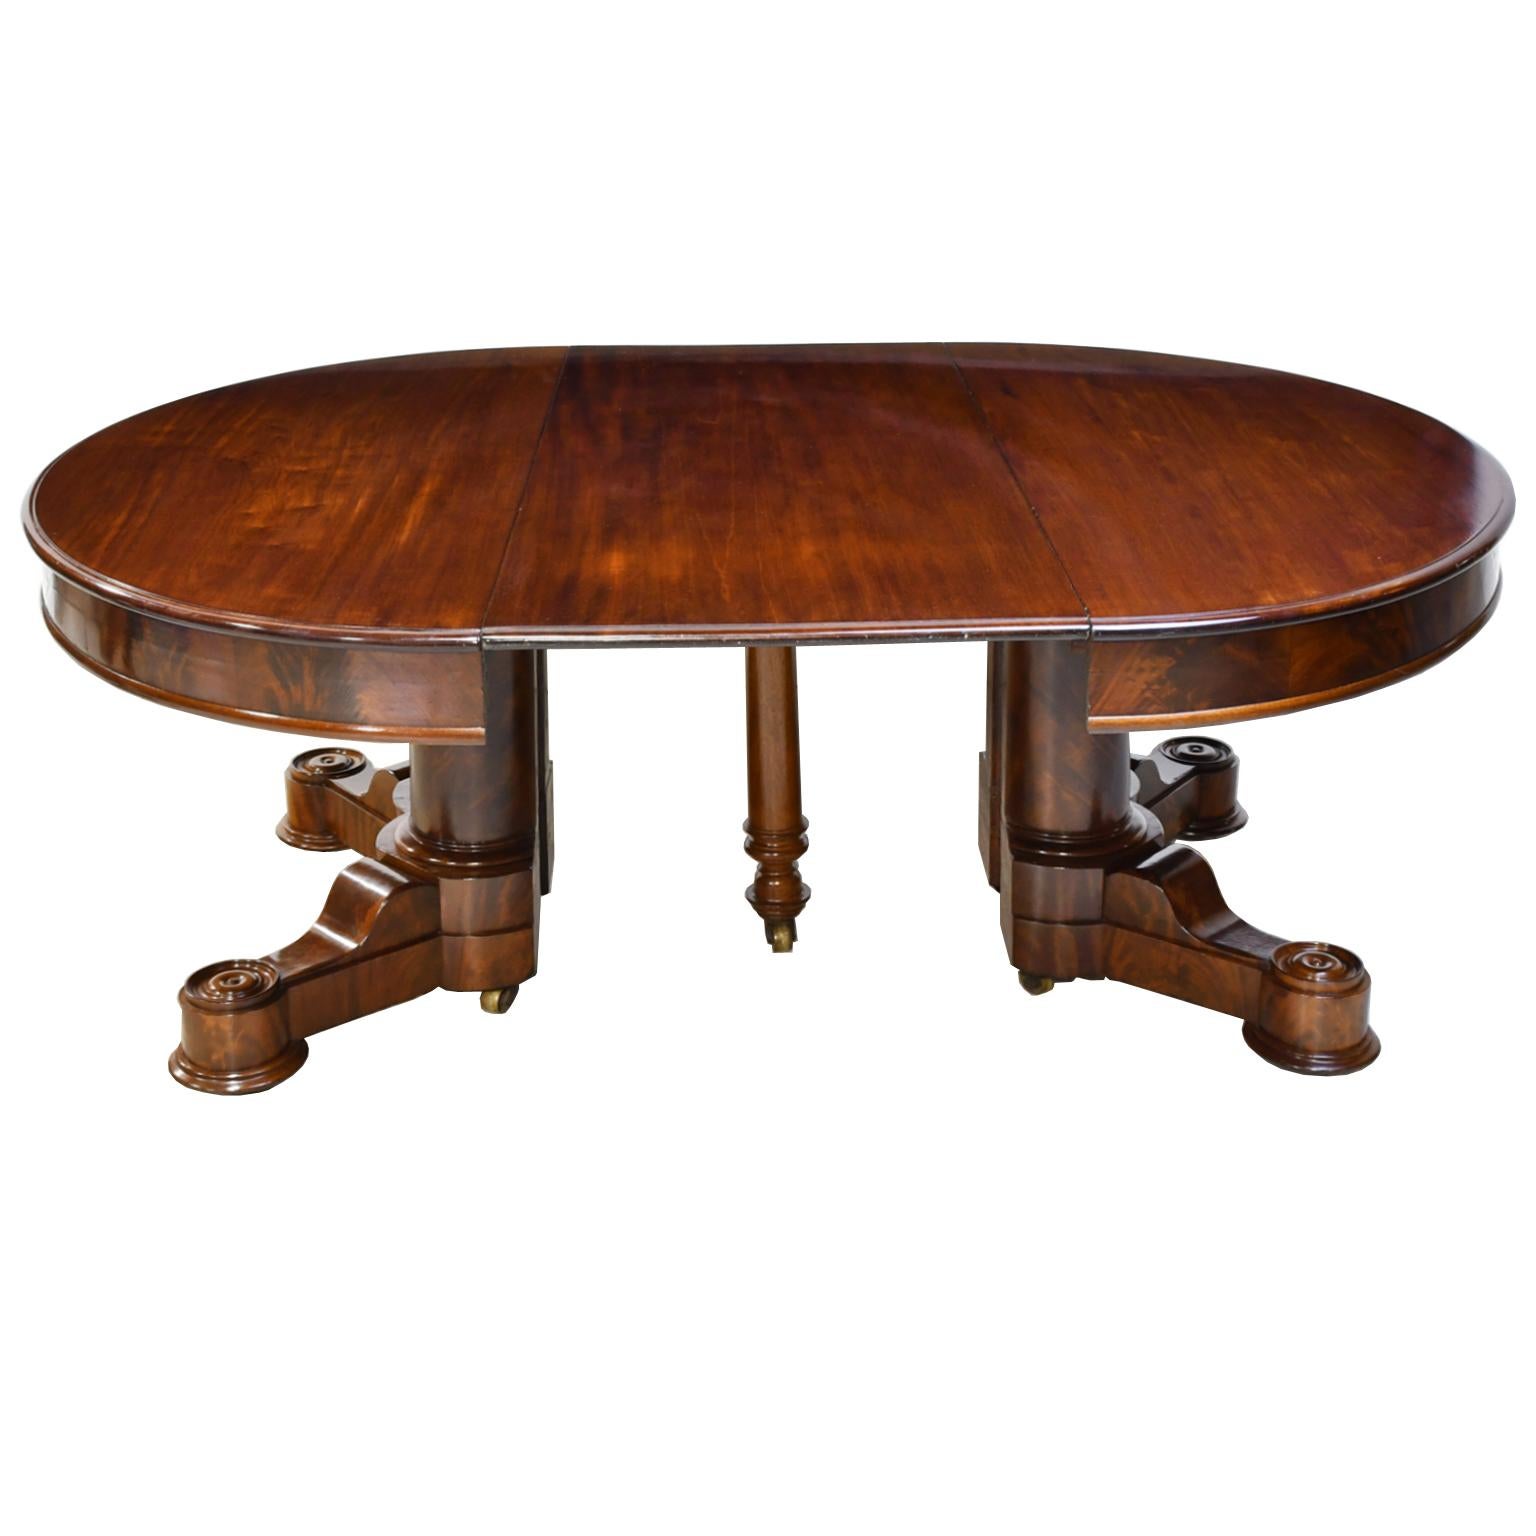 American Empire Oval Extension Dining Table in Mahogany with Pedestal Base 2